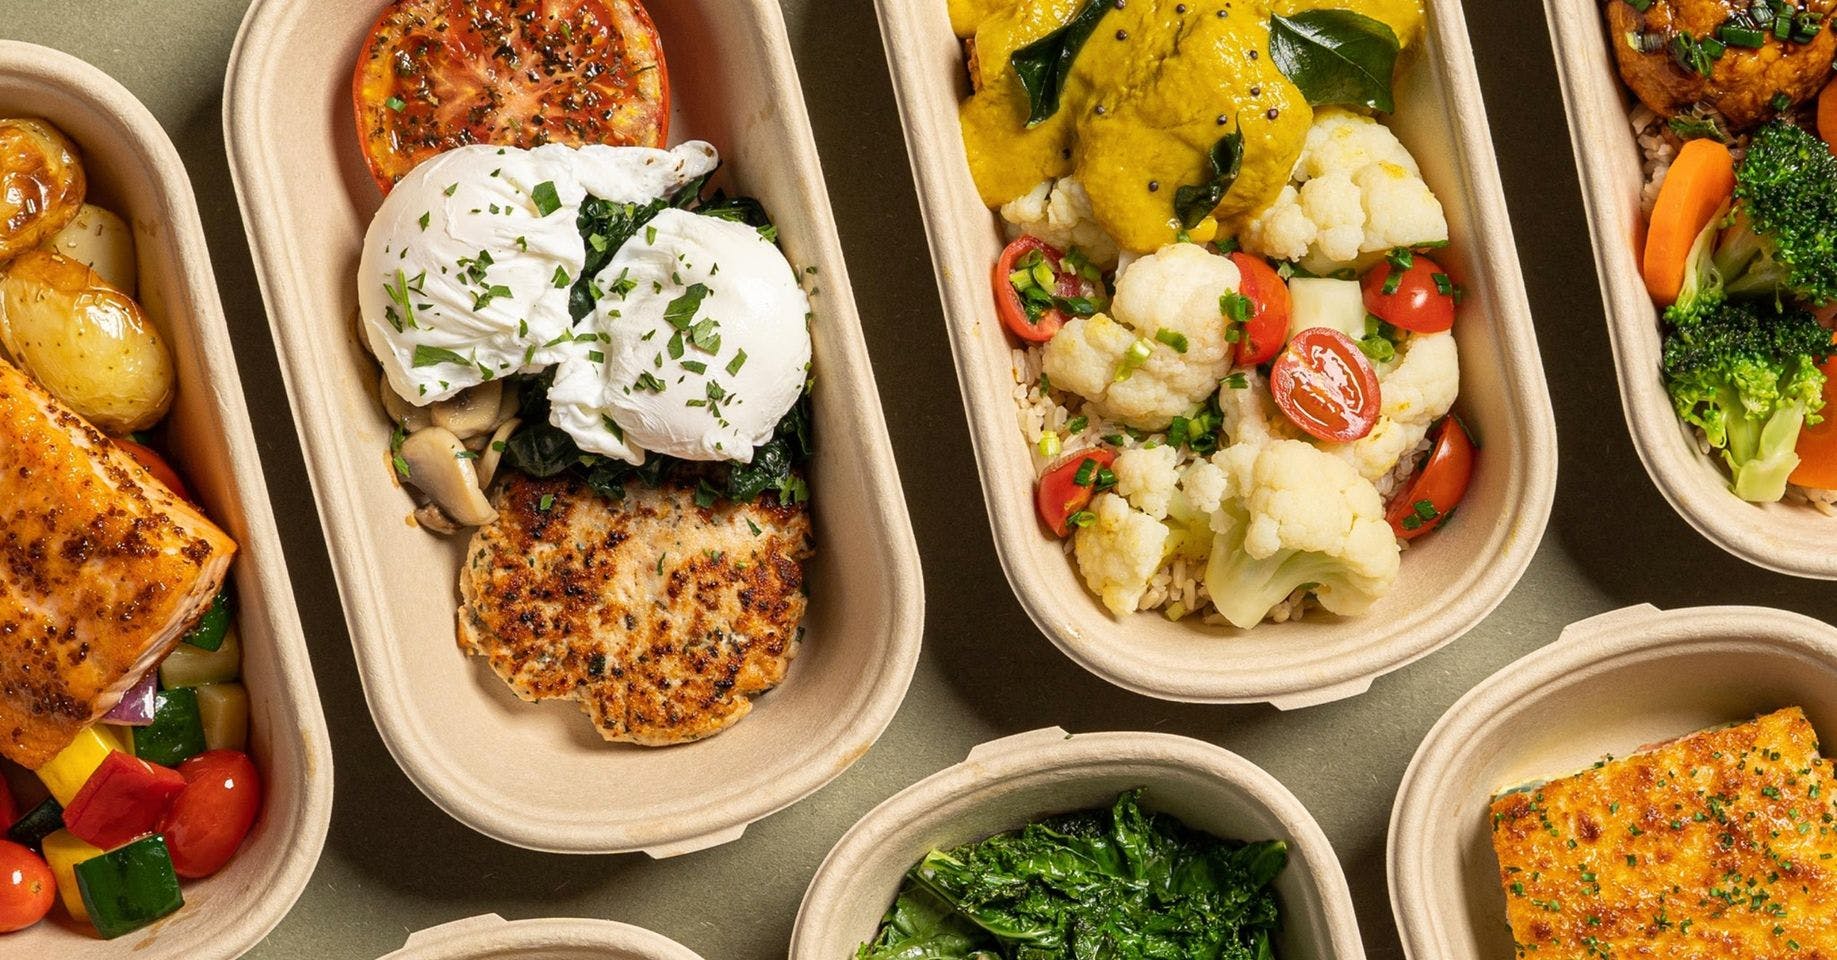 Meals at Nutrition Kitchen